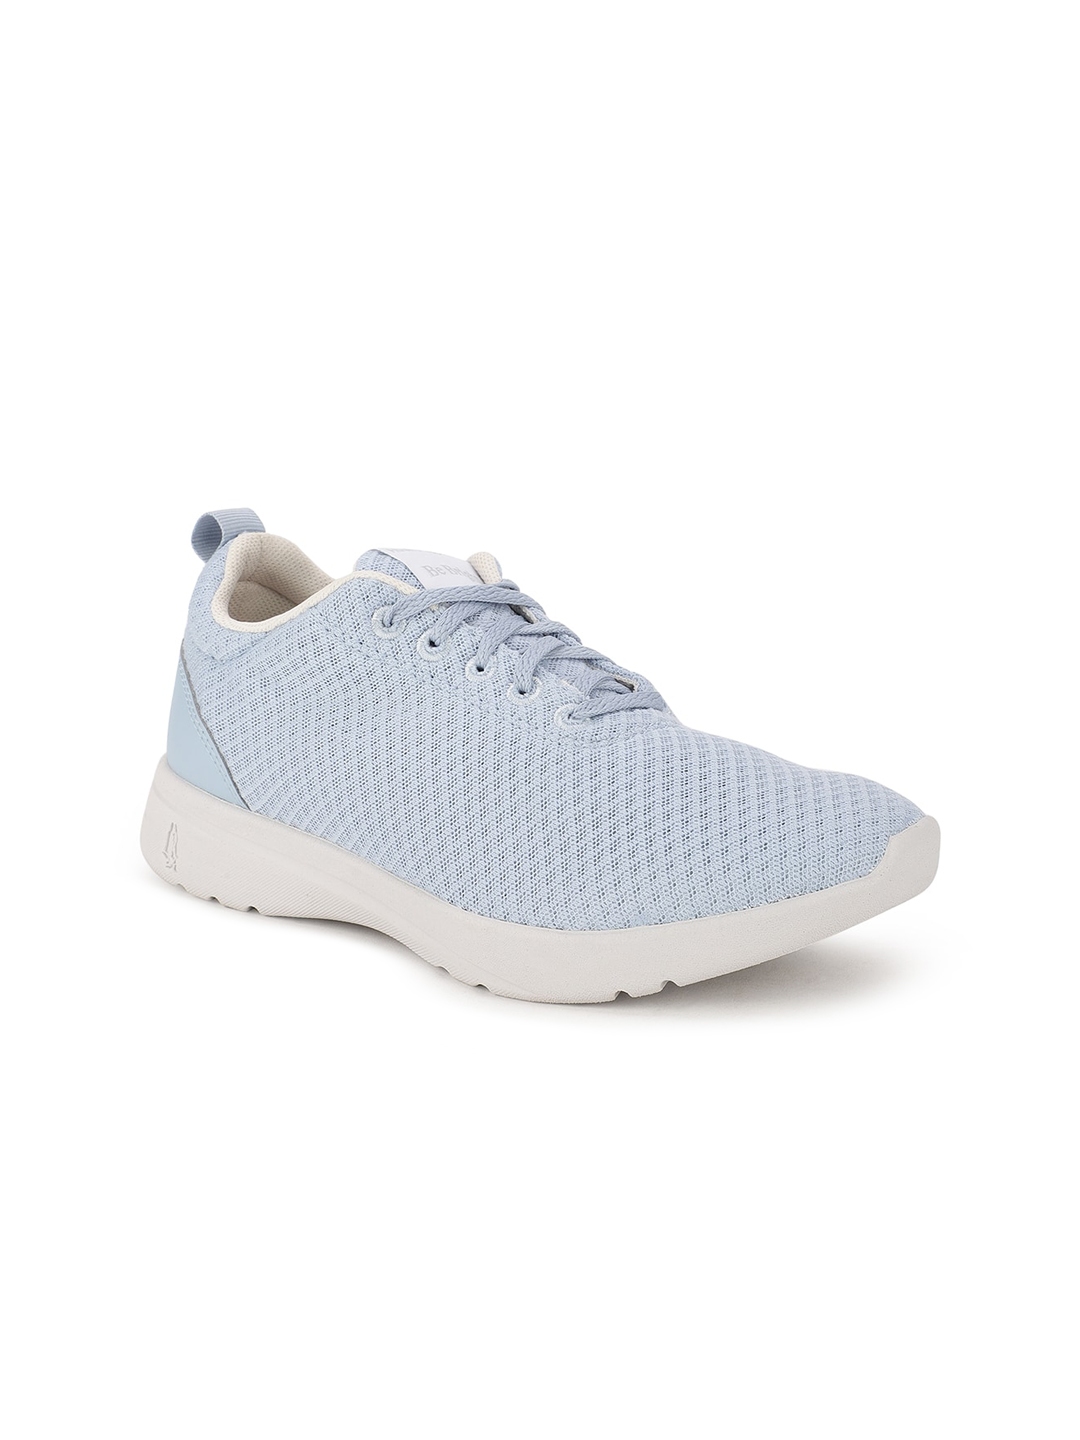 Buy Hush Puppies Women Blue Woven Design PU Sneakers - Casual Shoes for ...